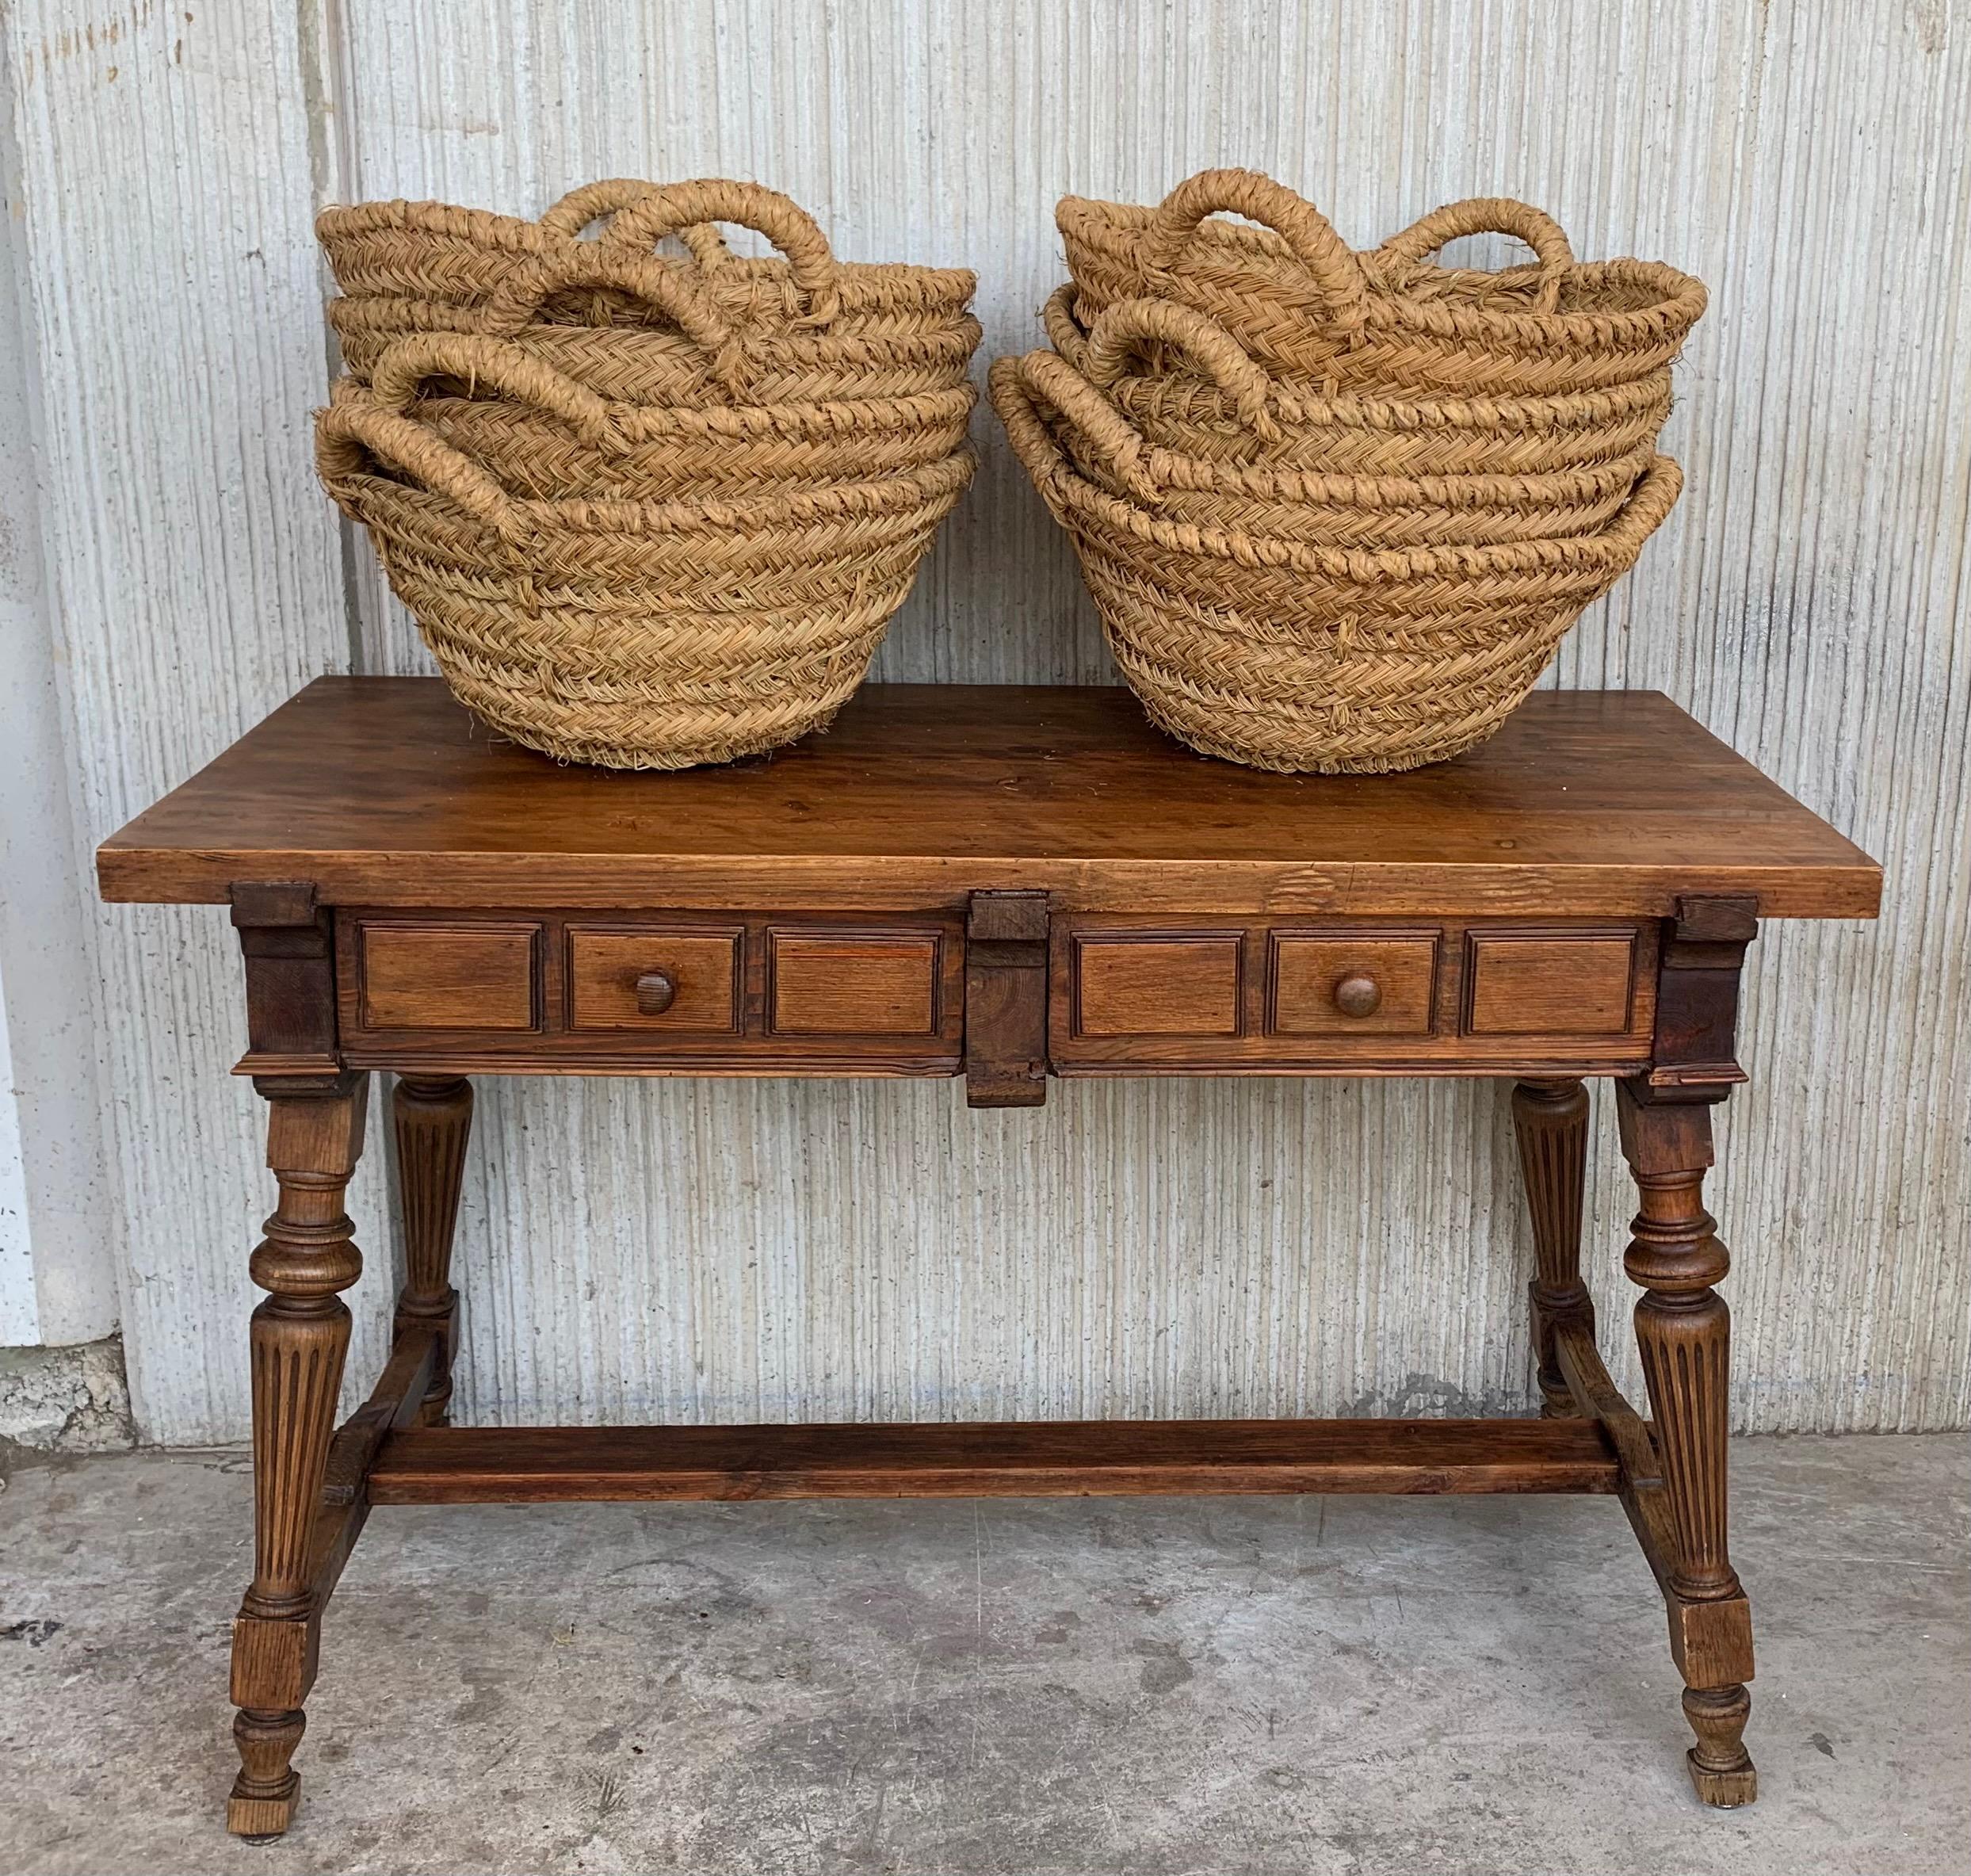 Rustic Spanish chateau champagne grape harvesting basket constructed from woven wicker reeds. Features a thick braided top with handles on each end 
 Perfect for decorating and display.

We have available 26 basquets.

 